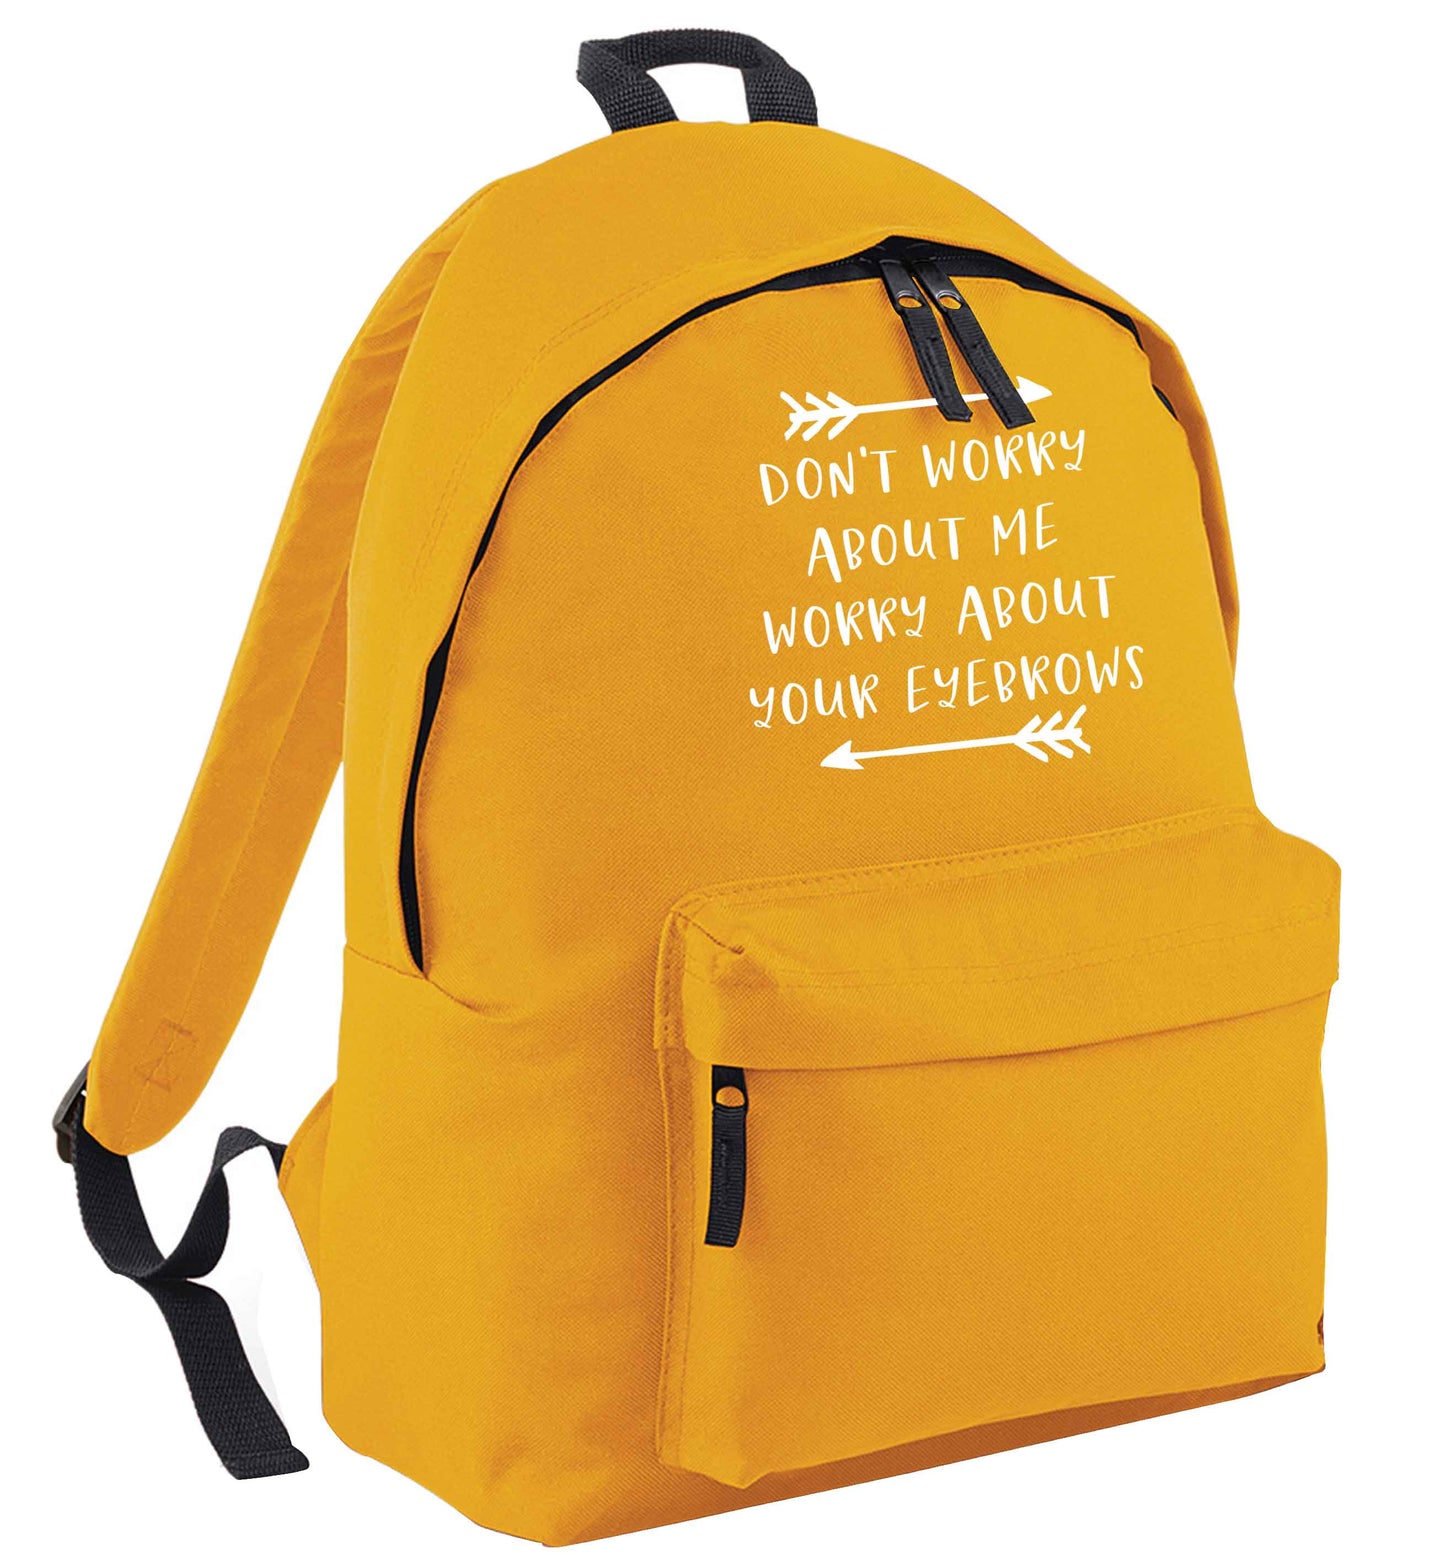 Don't worry about me worry about your eyebrows mustard adults backpack